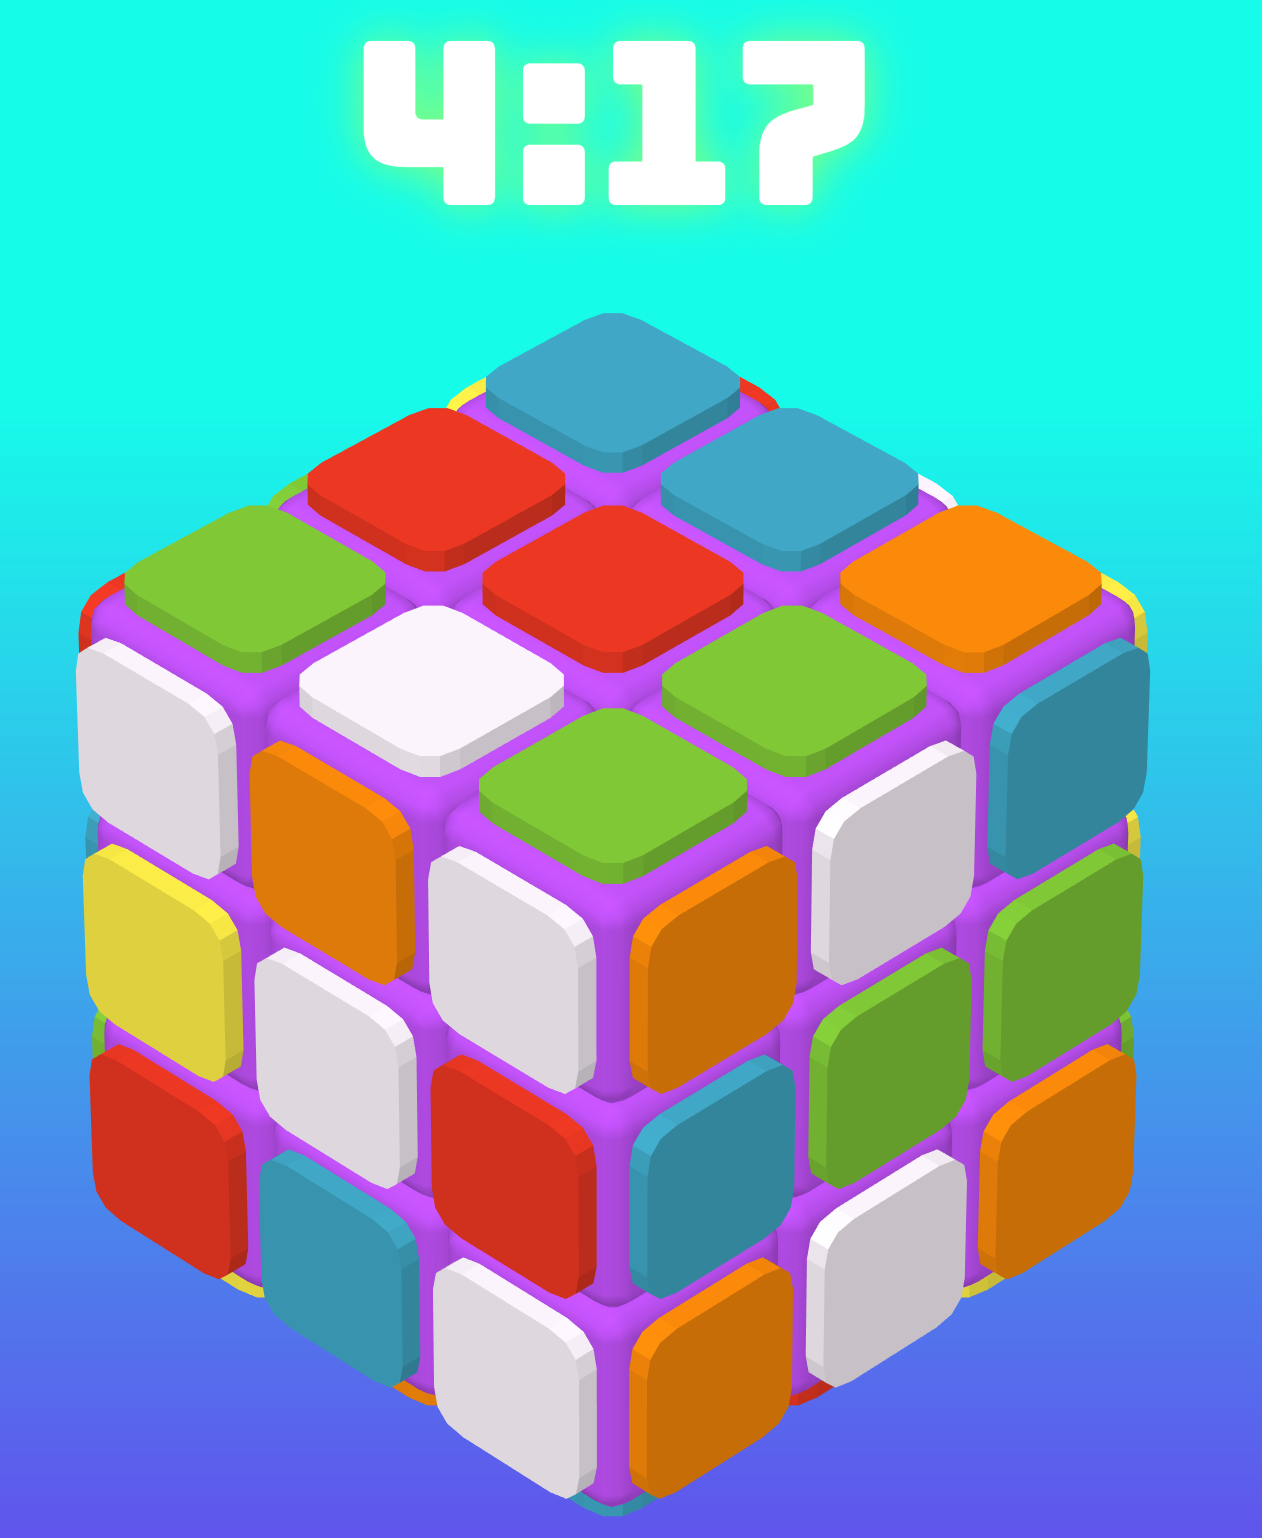 Play Rubiks Cube Online for Free: HTML5 Rubkis Cube Game